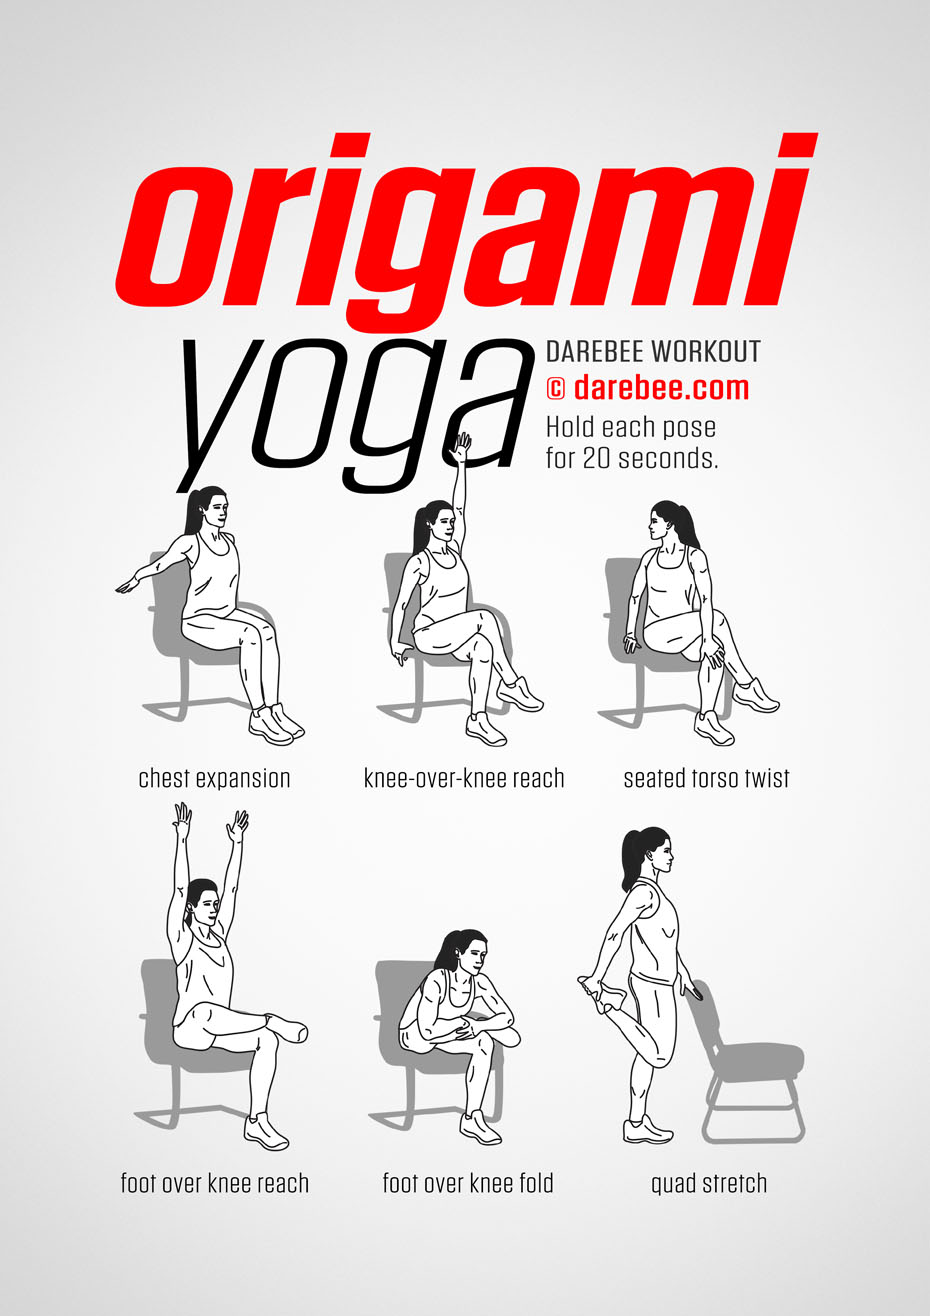 https://darebee.com/images/workouts/origami-yoga-workout.jpg